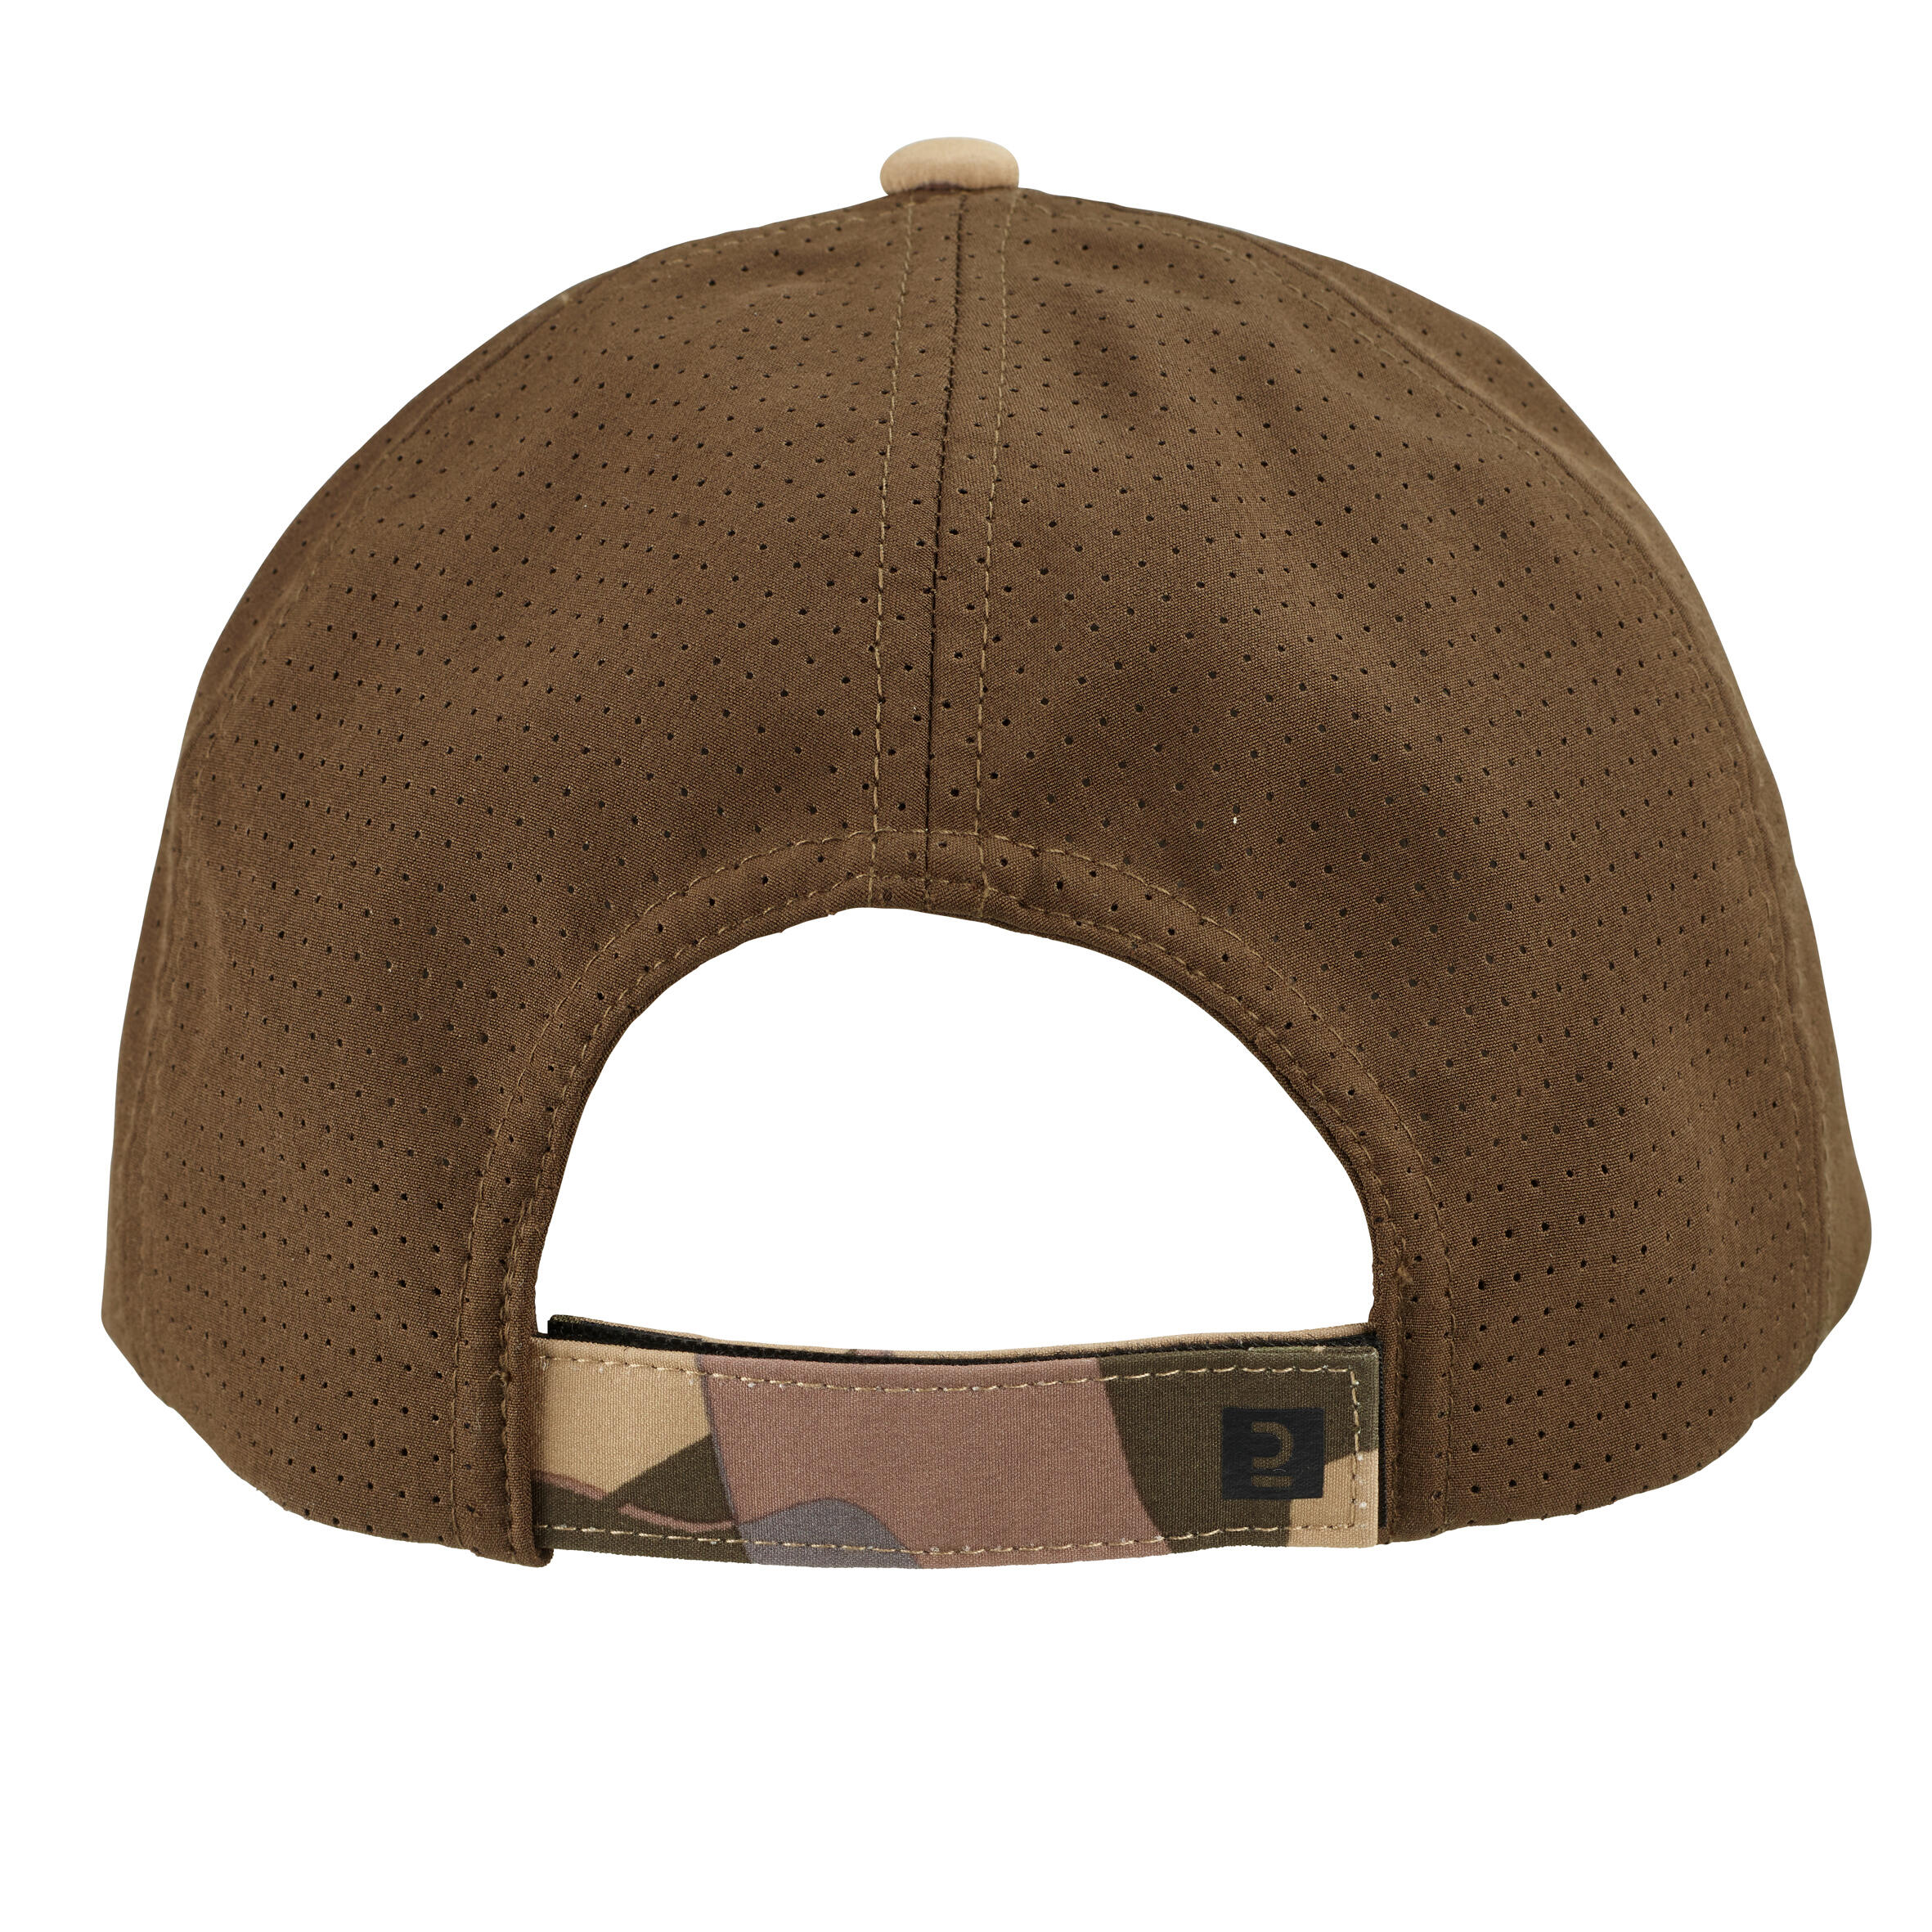 Lightweight and breathable hunting cap 520 camo brown & uni 4/7